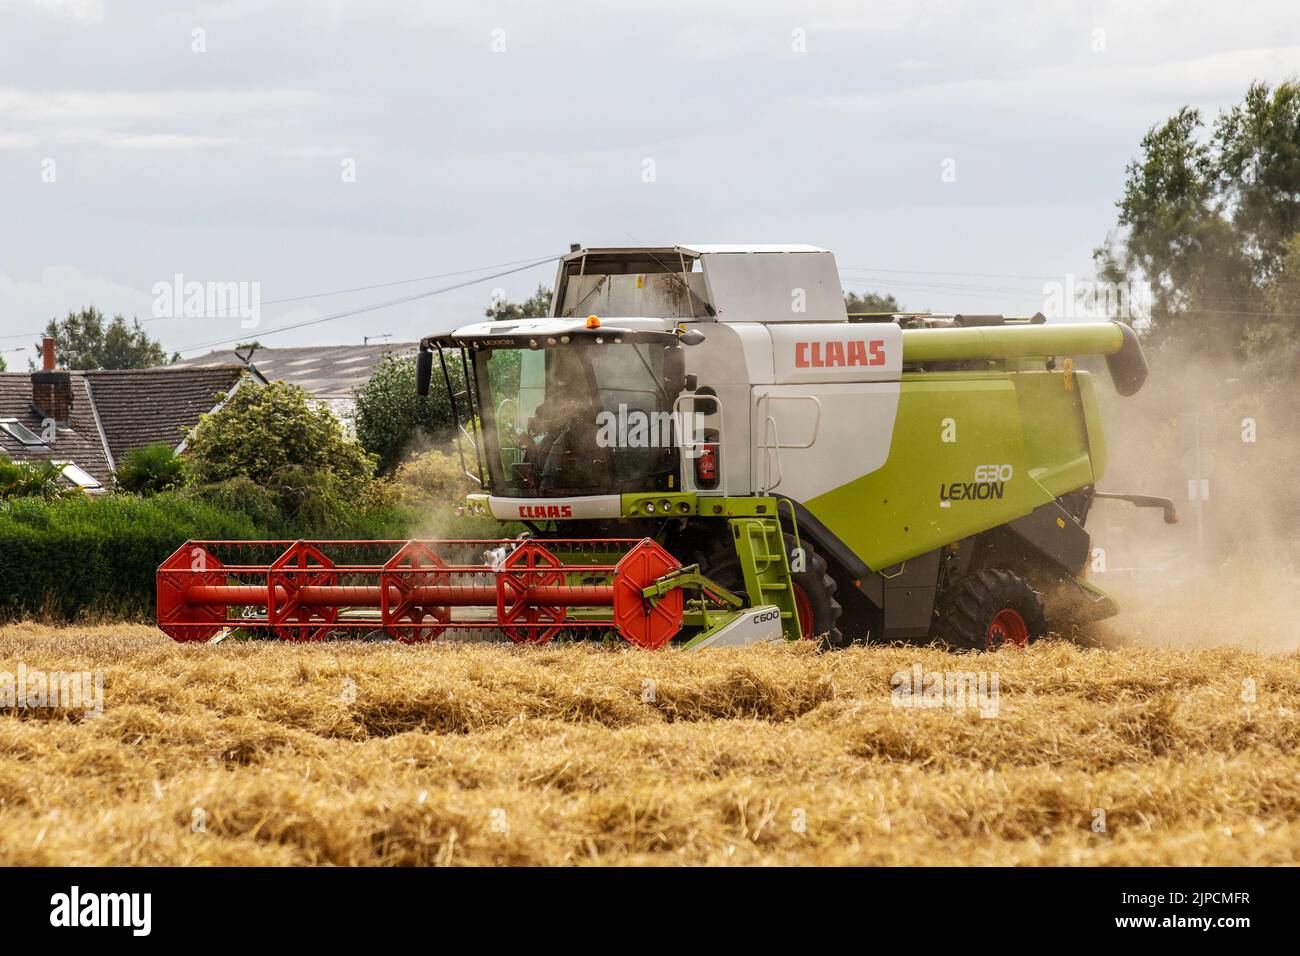 Claas Lexion 8900 The world's biggest harvester in Tarleton, Lancashire.  UK Weather. August 2022. Claus Combine Harvester contractor in demand in rural Lancashire as rain is forecast within the next 24 hours.  It takes around 2 months for barley to grow large enough to harvest and have the largest yield of grains. When the stalks turn completely golden yellow, the moisture levels in the barley are lower and they are easier to cut down.  There is an old adage when growing barley.  'When it looks ready to harvest - wait a month.' Stock Photo